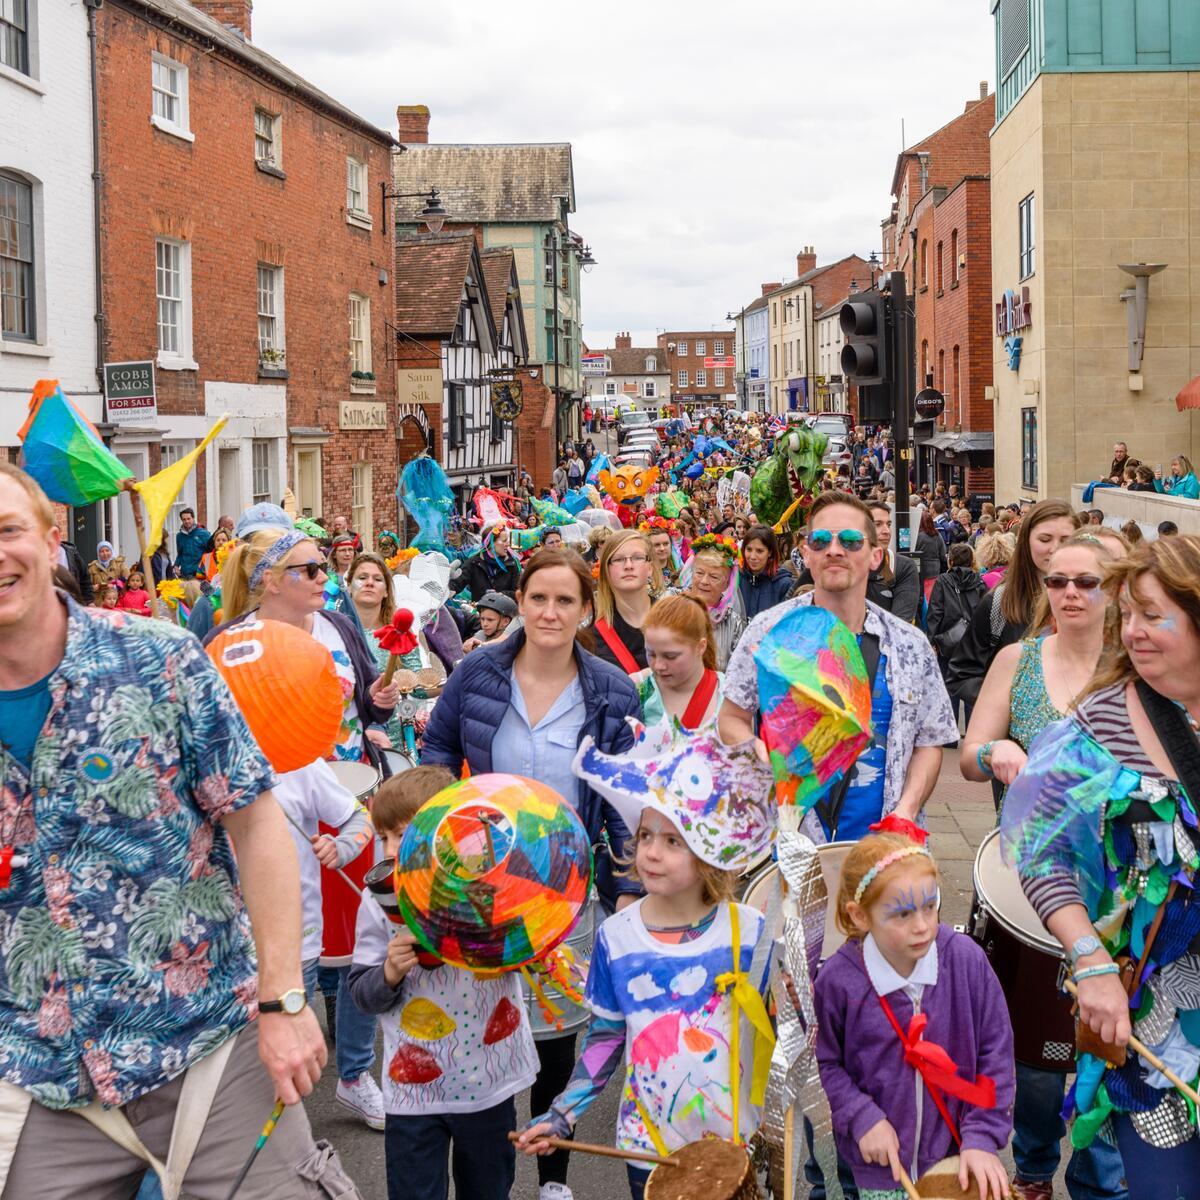 The Street Carnival through Hereford